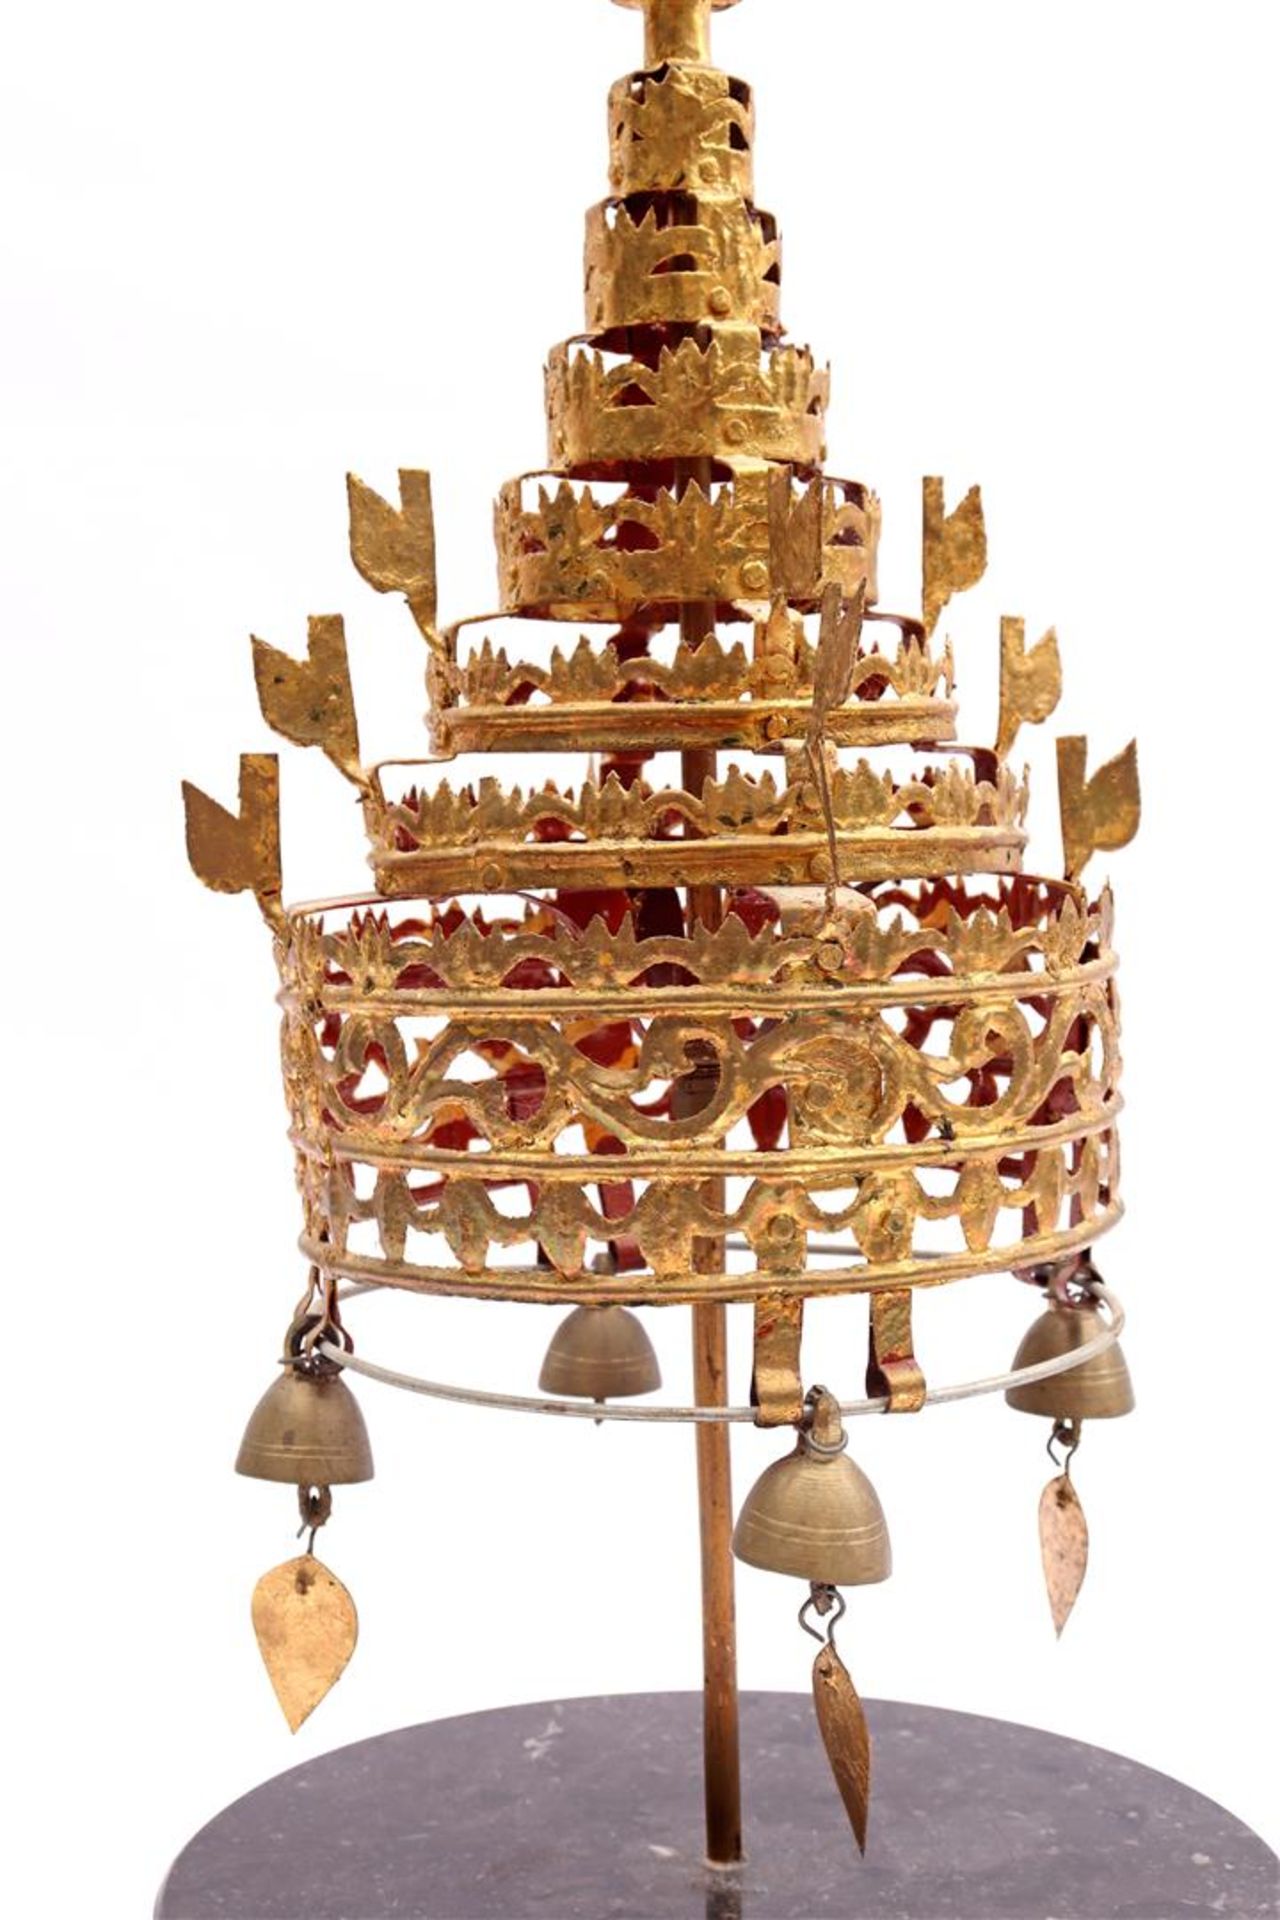 Thai crown with bells - Image 2 of 2